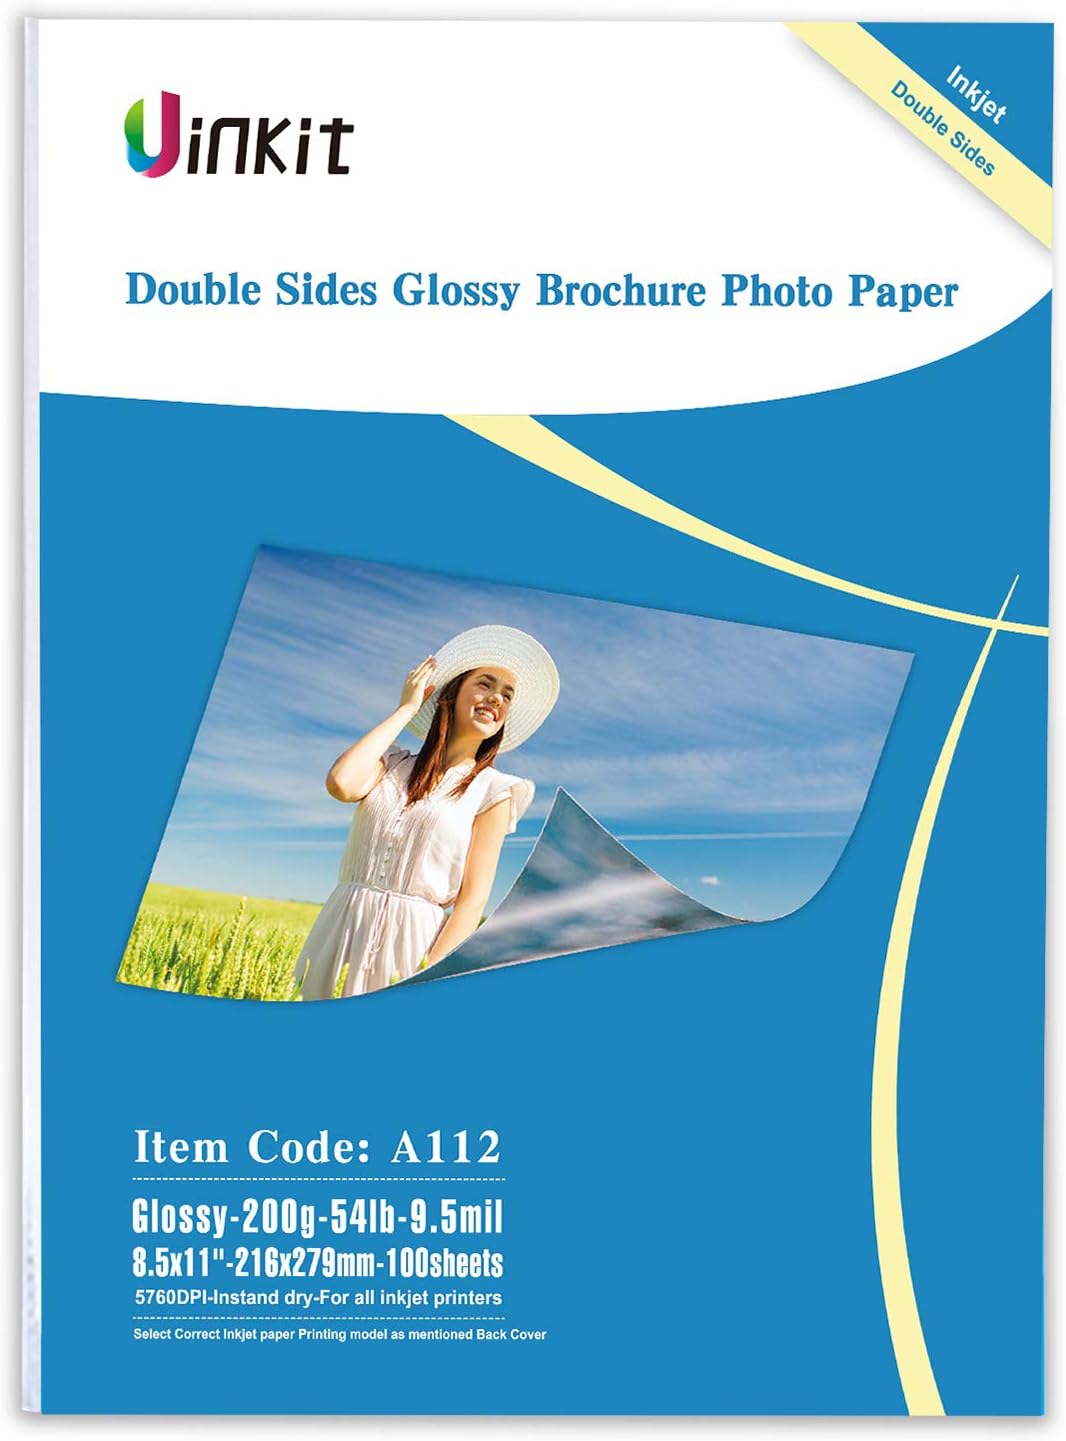 100 Sheets Double Sided Glossy Photo Paper Inkjet [...]